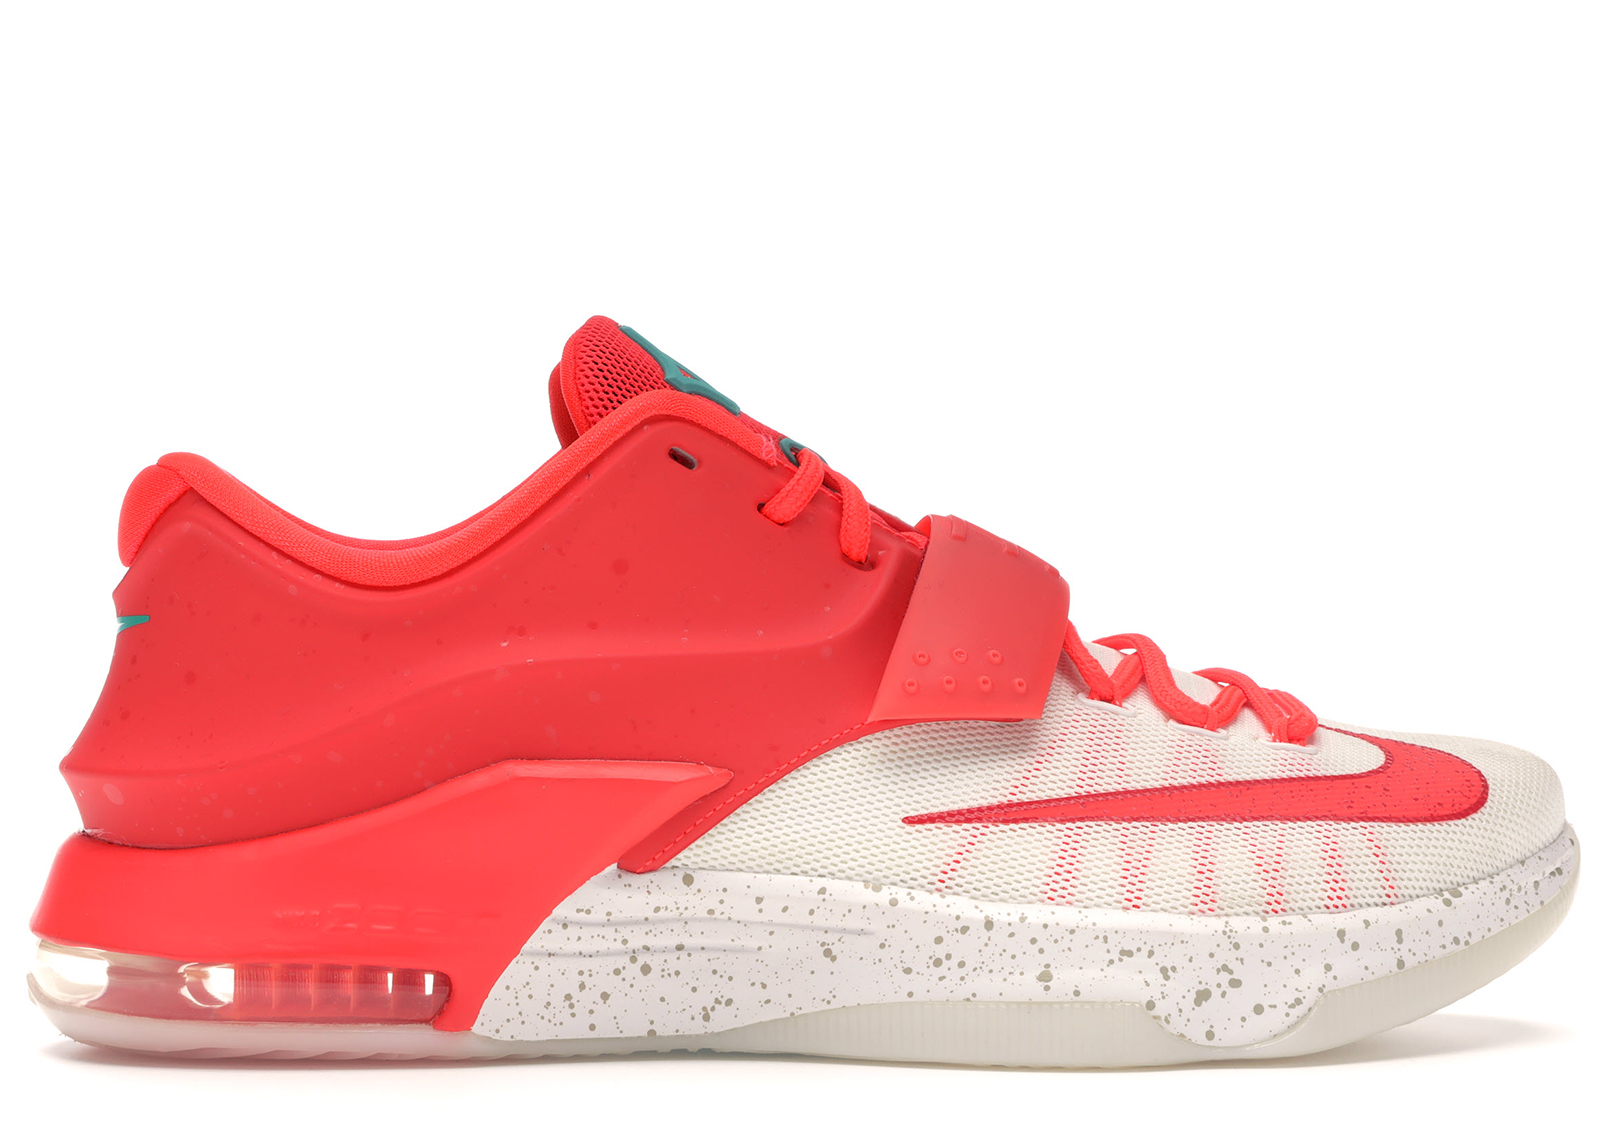 kd 7 red